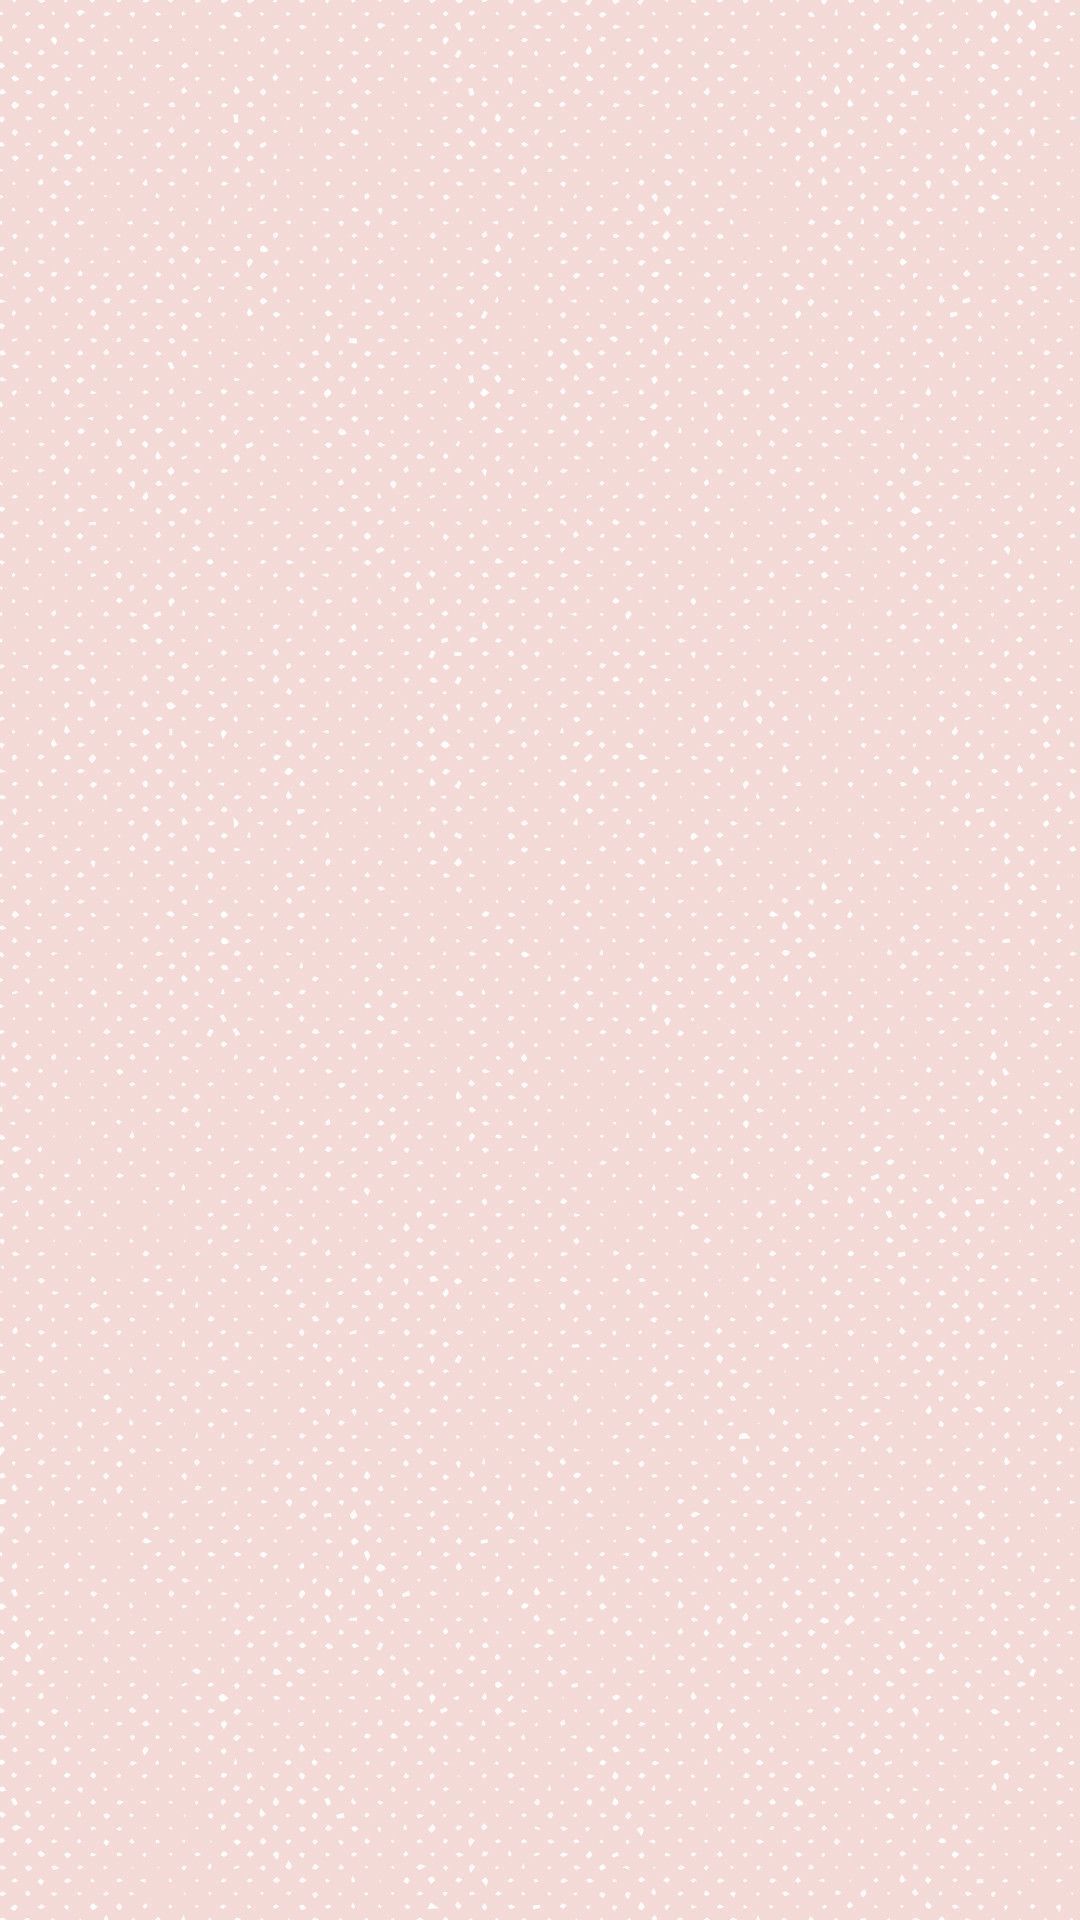 Pastel Pink iPhone Wallpapers - Wallpaper Cave